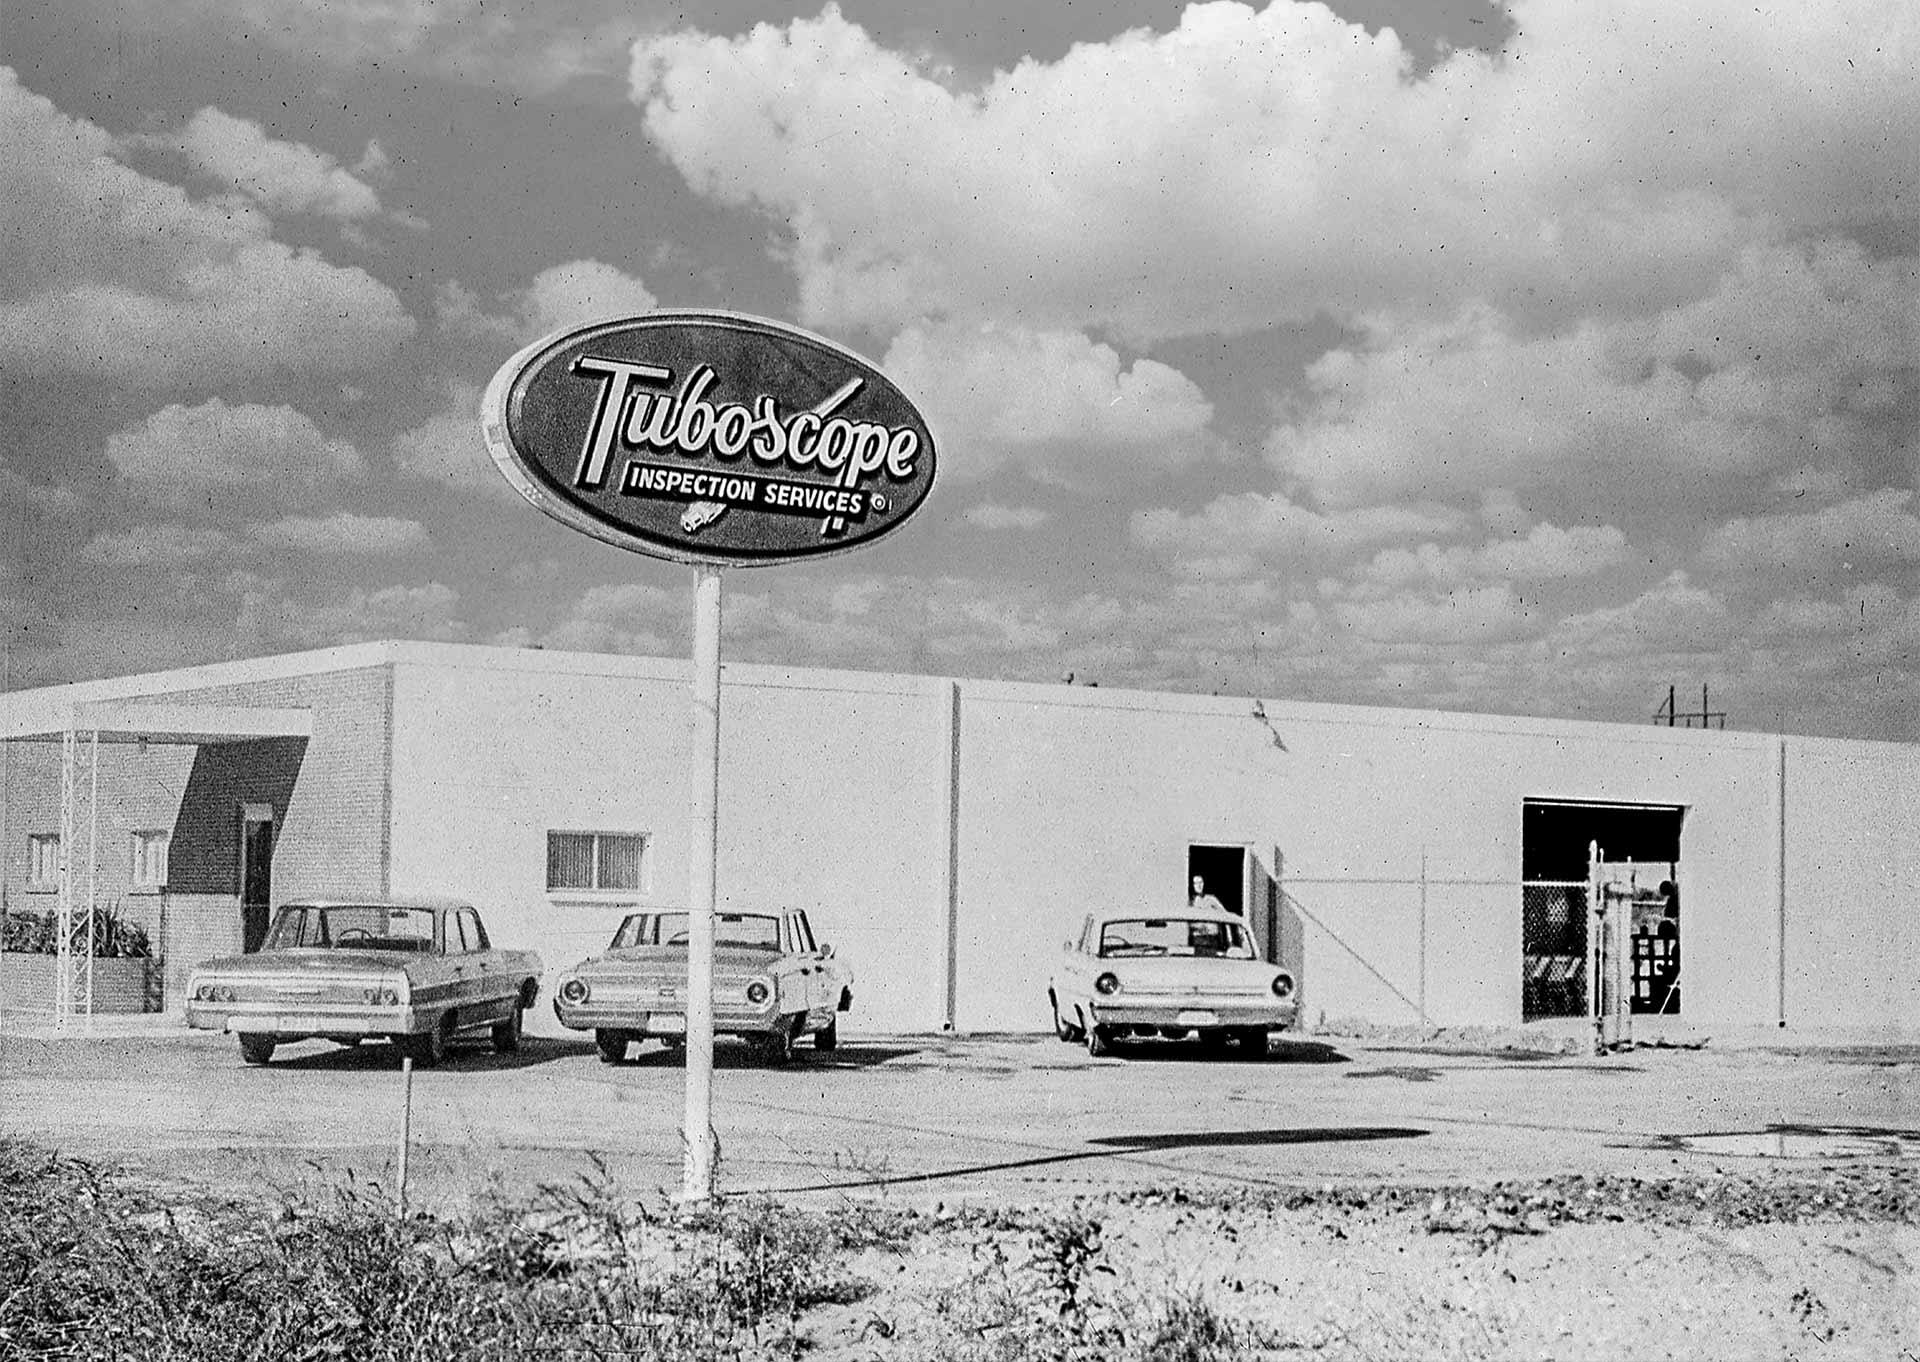 Vintage image of Tuboscope's facility at Homes road in Houston, TX